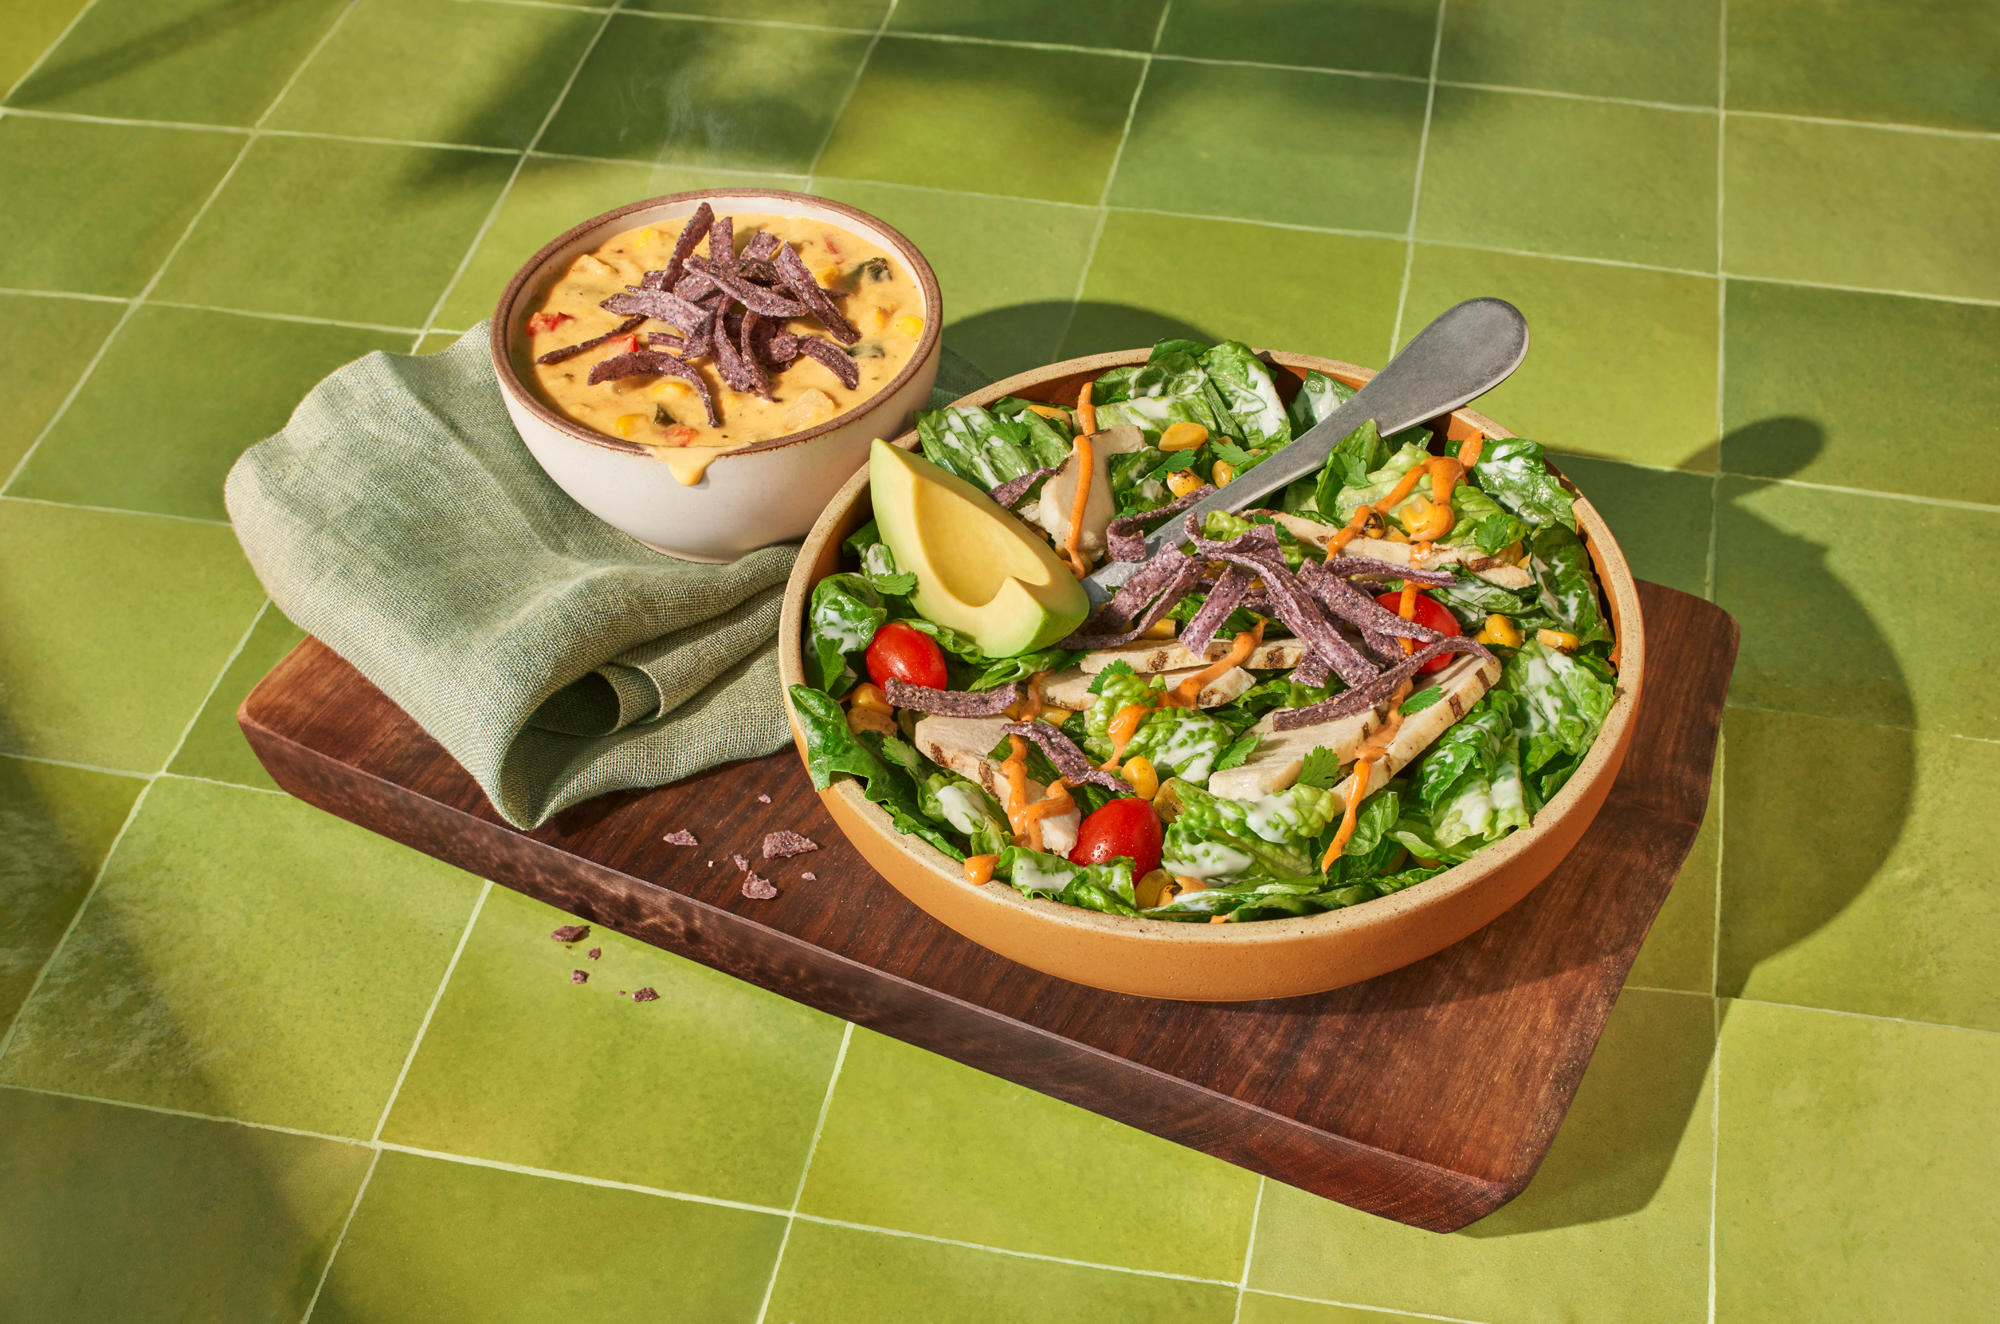 Southwest Chicken Ranch Salad & Mexican Street Corn Chowder Cup You Pick 2 Panera Bread Port St Lucie (772)237-8088